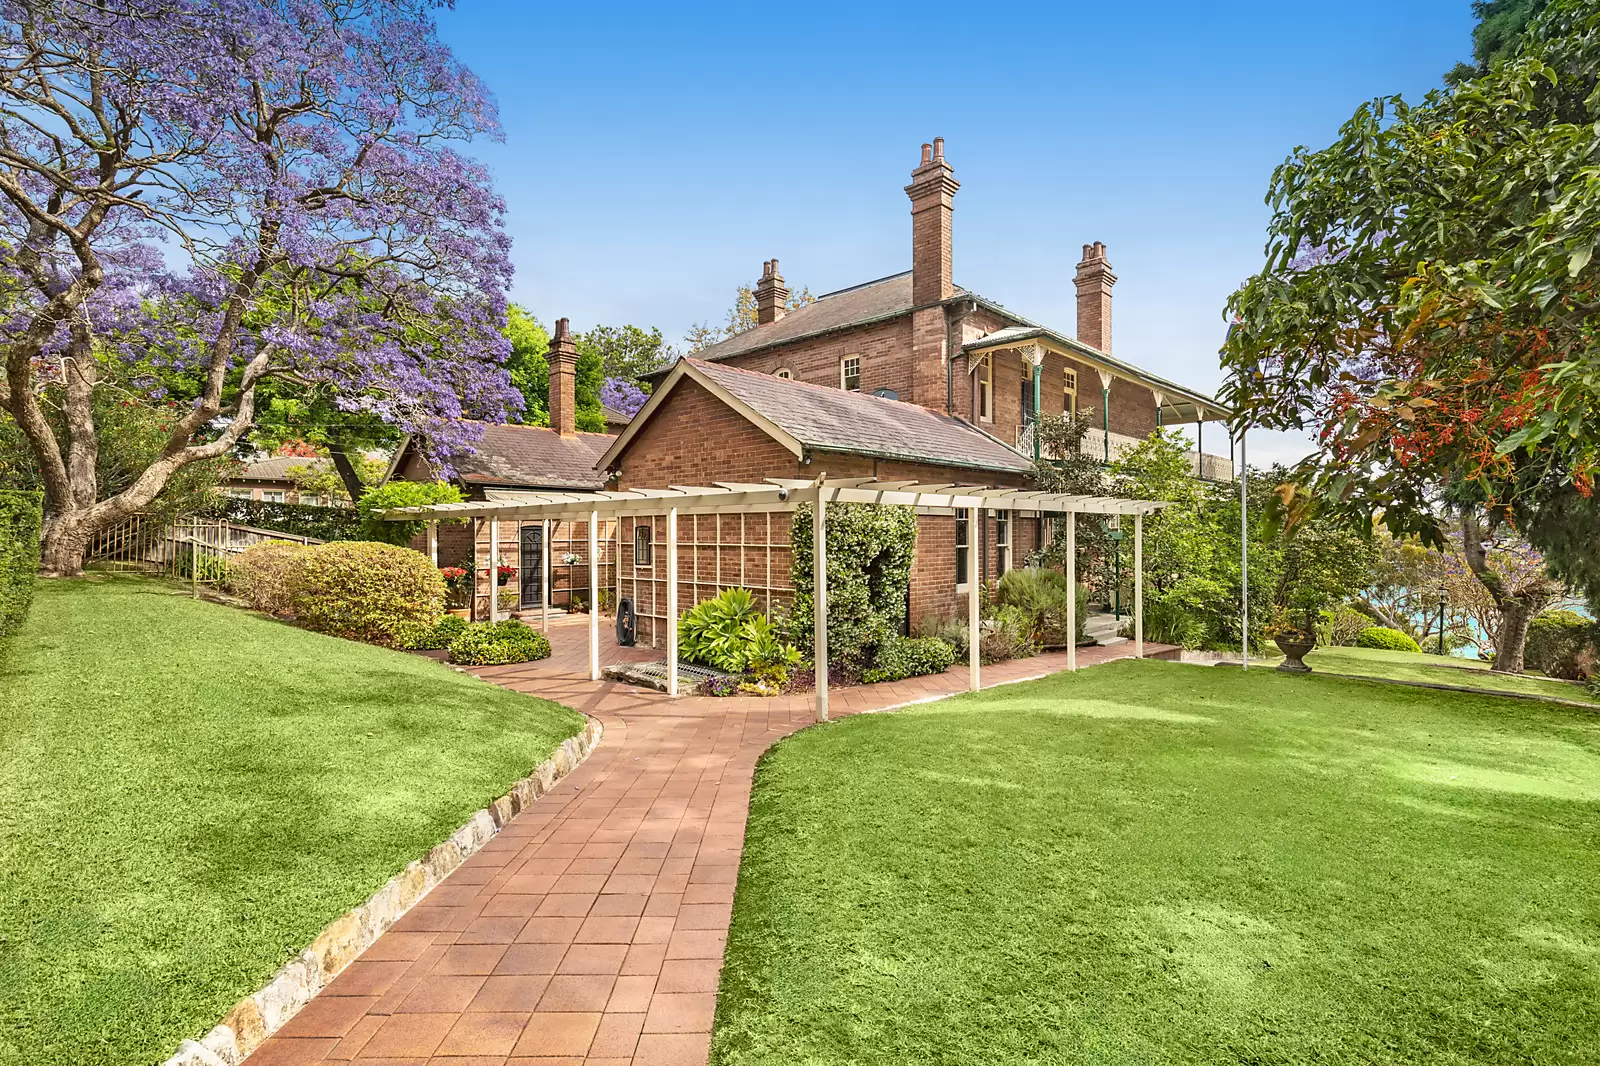 Photo #7: 1 Wybalena Road, Hunters Hill - Auction by Sydney Sotheby's International Realty